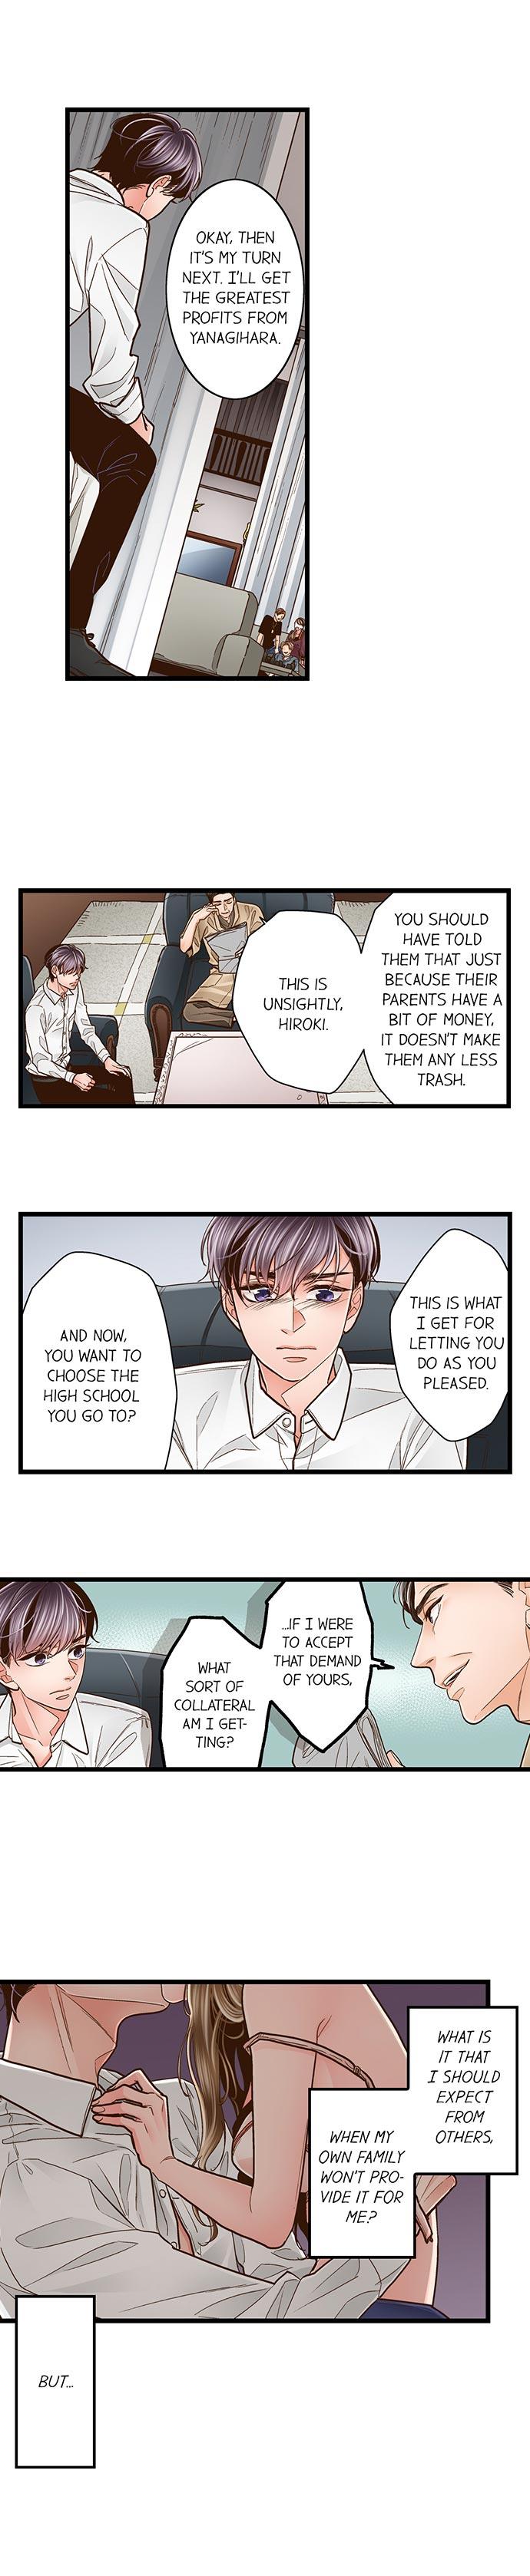 Yanagihara Is a Sex Addict. - Chapter 86 Page 3